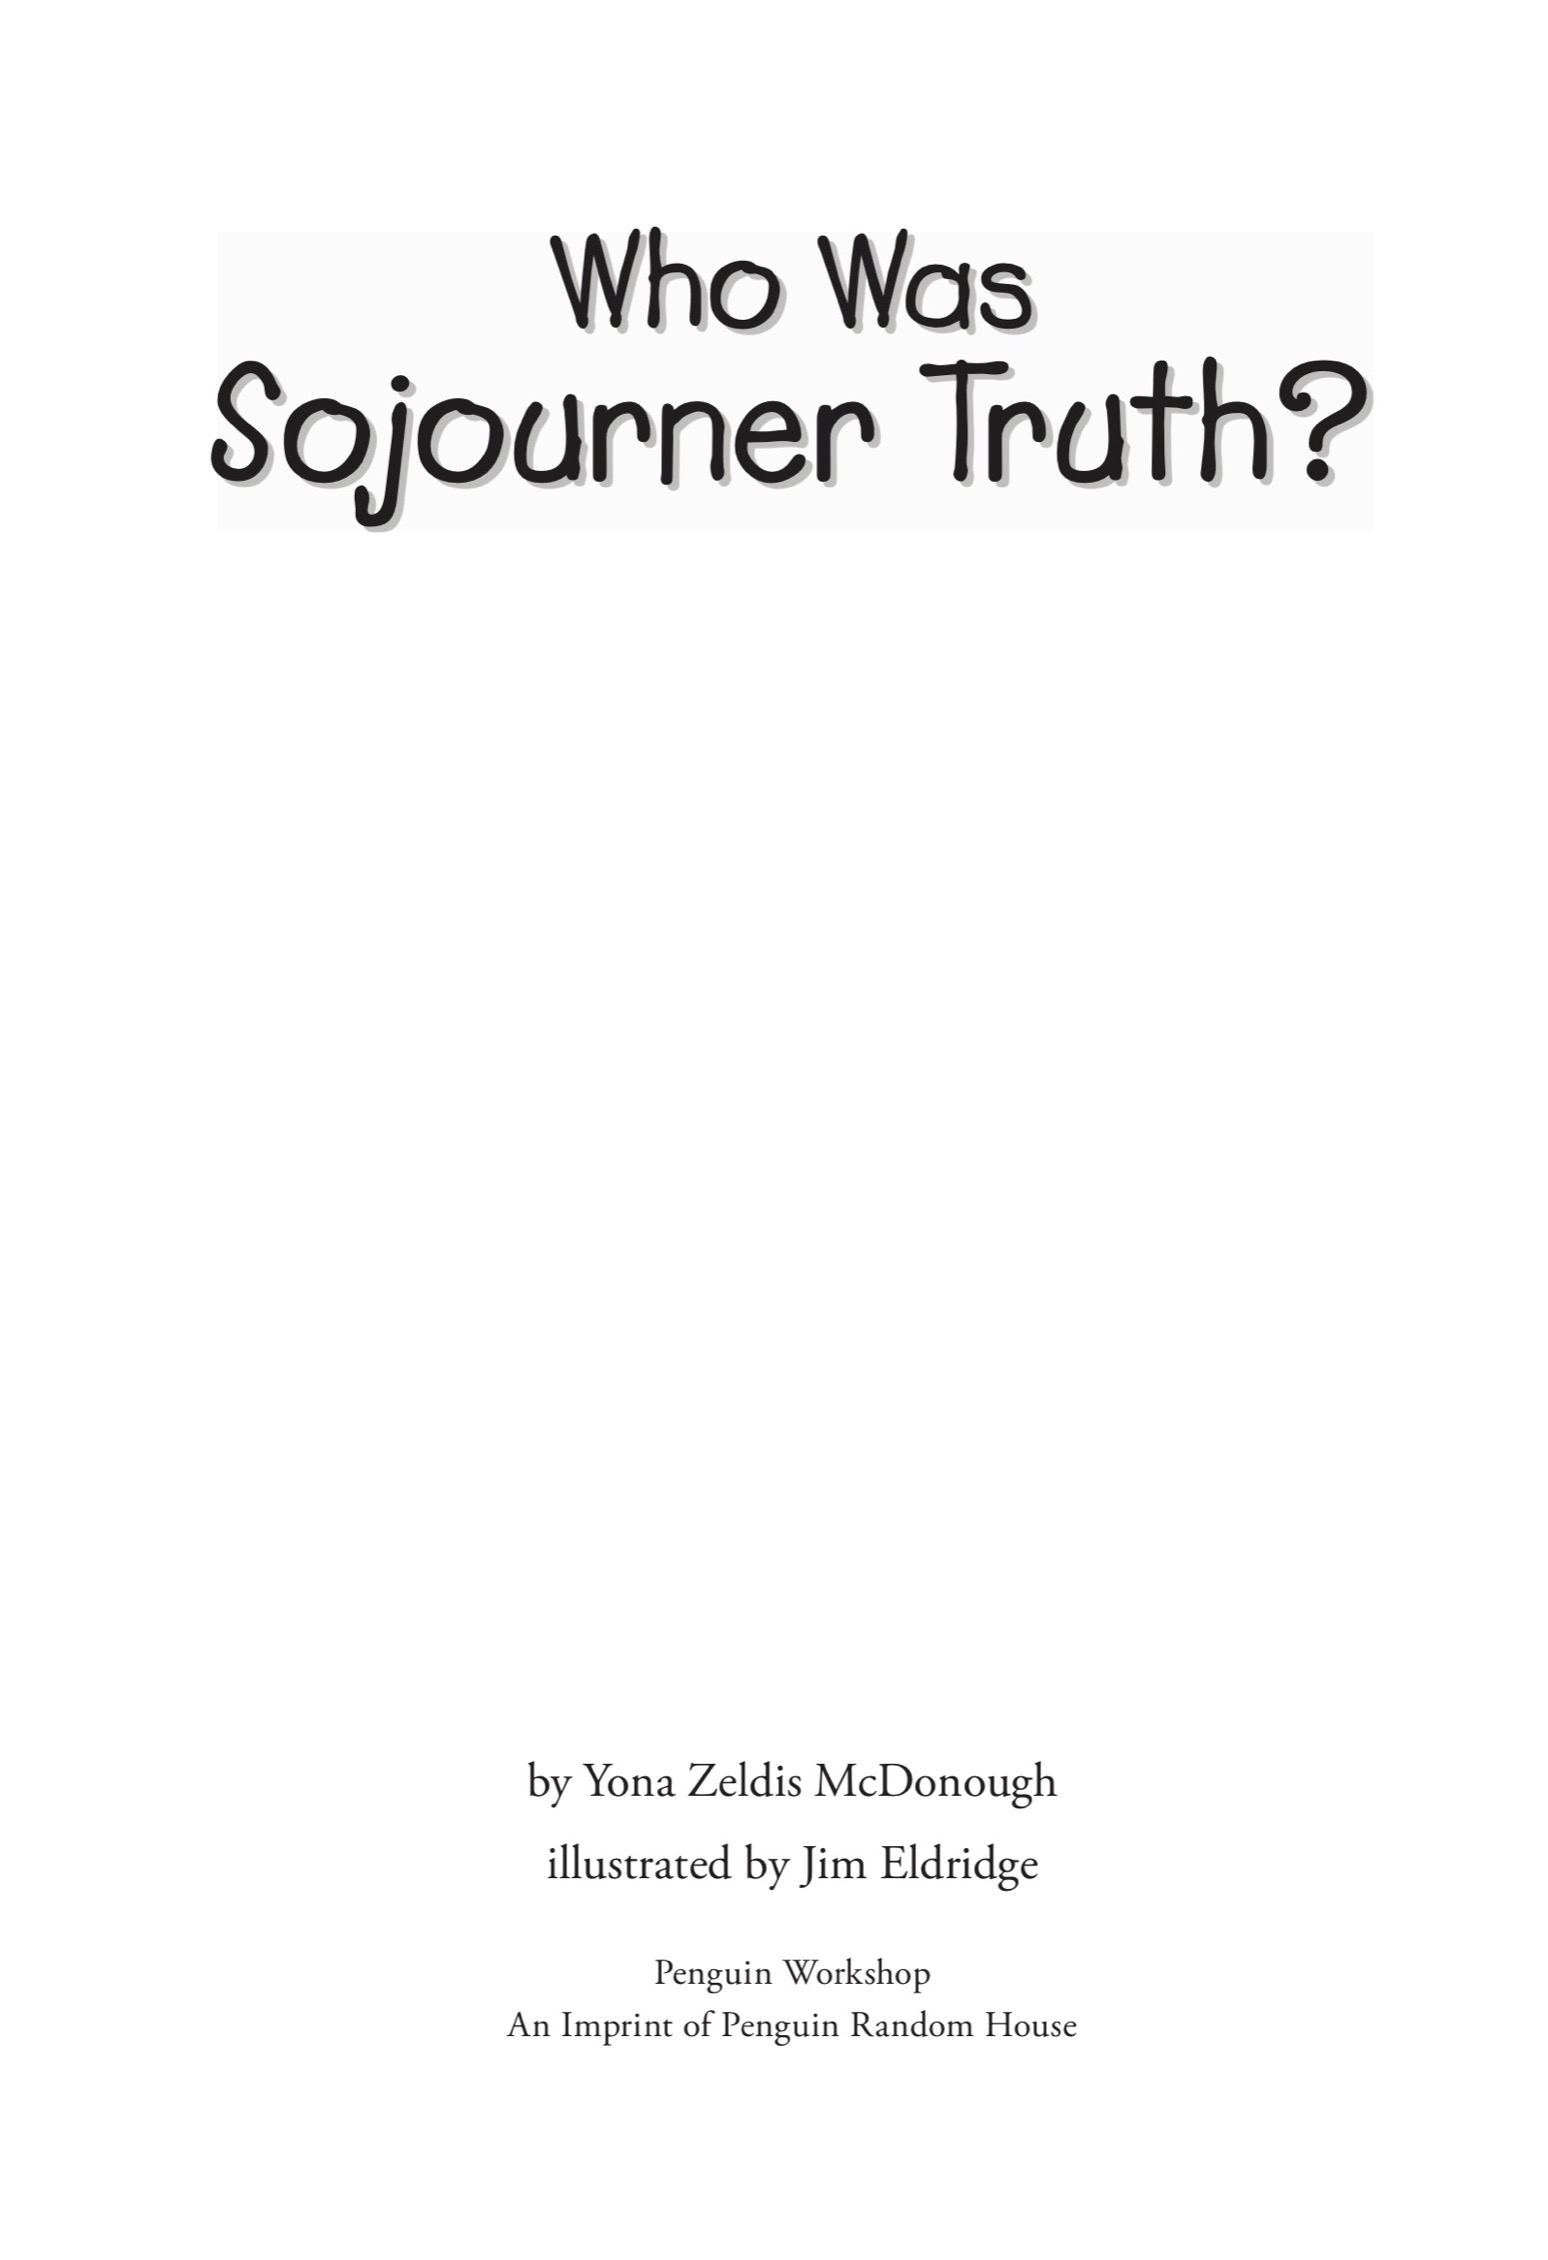 Who Was Sojourner Truth - image 2